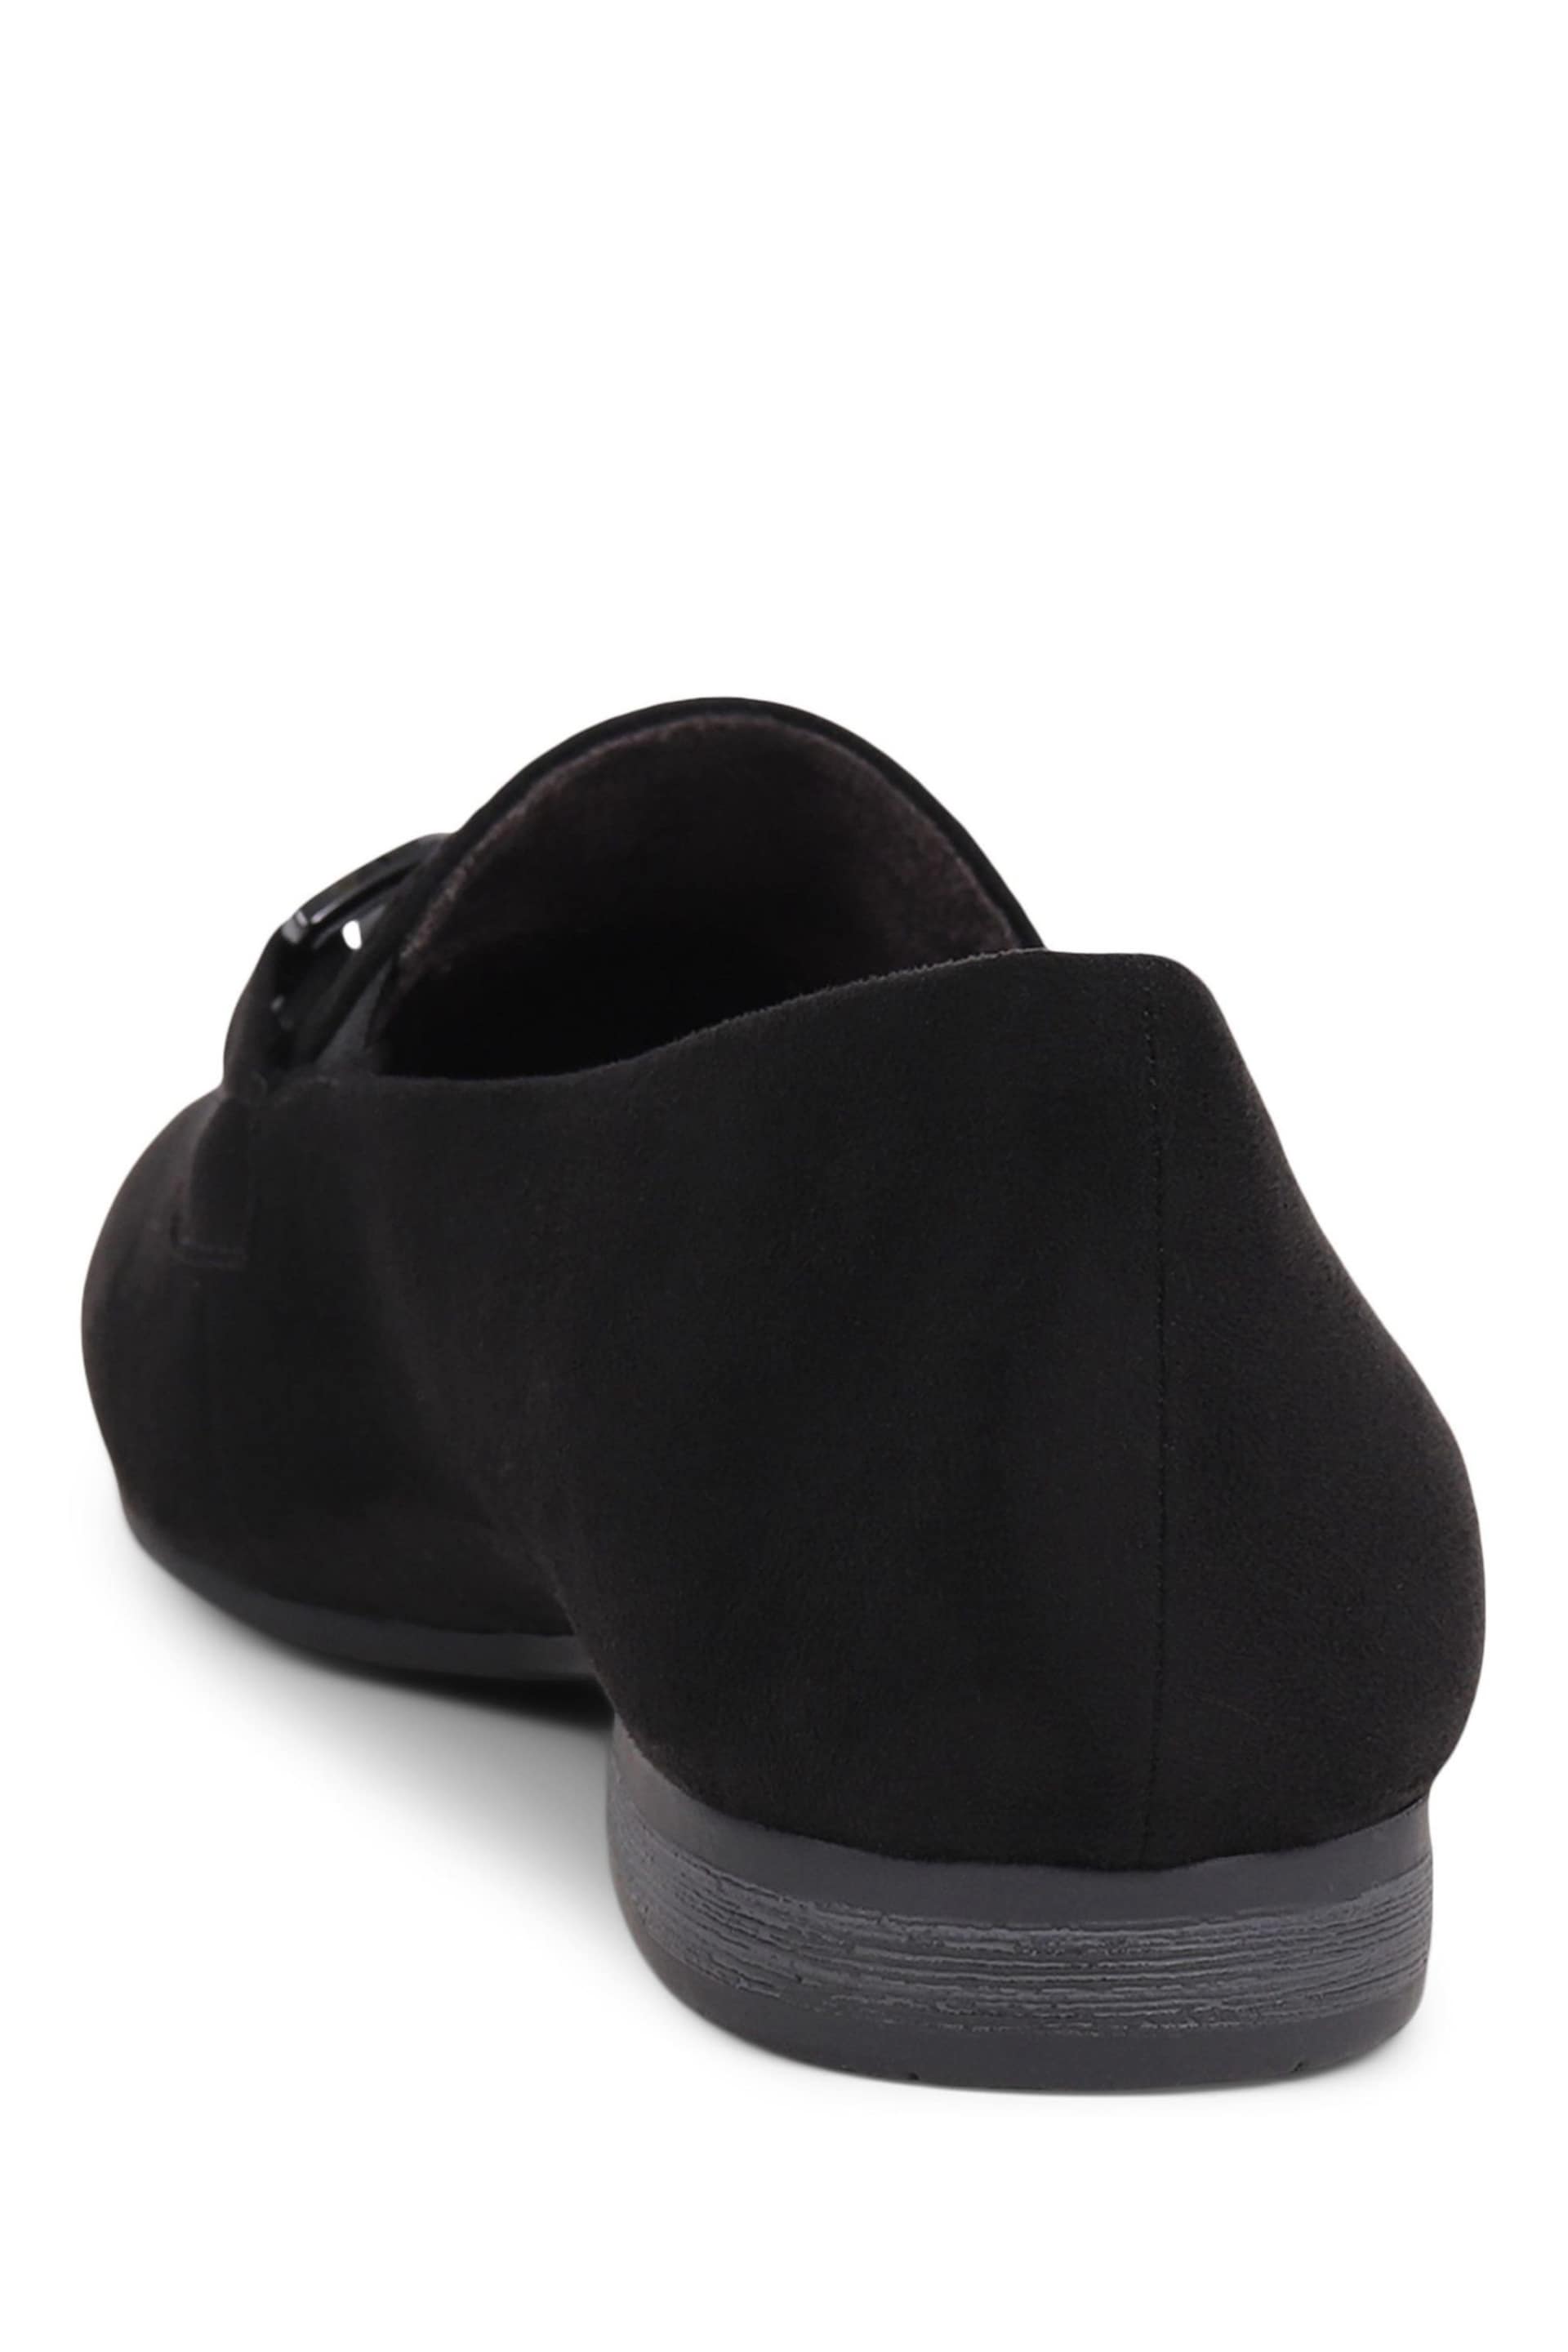 Pavers Smart Slip On Loafers - Image 3 of 5